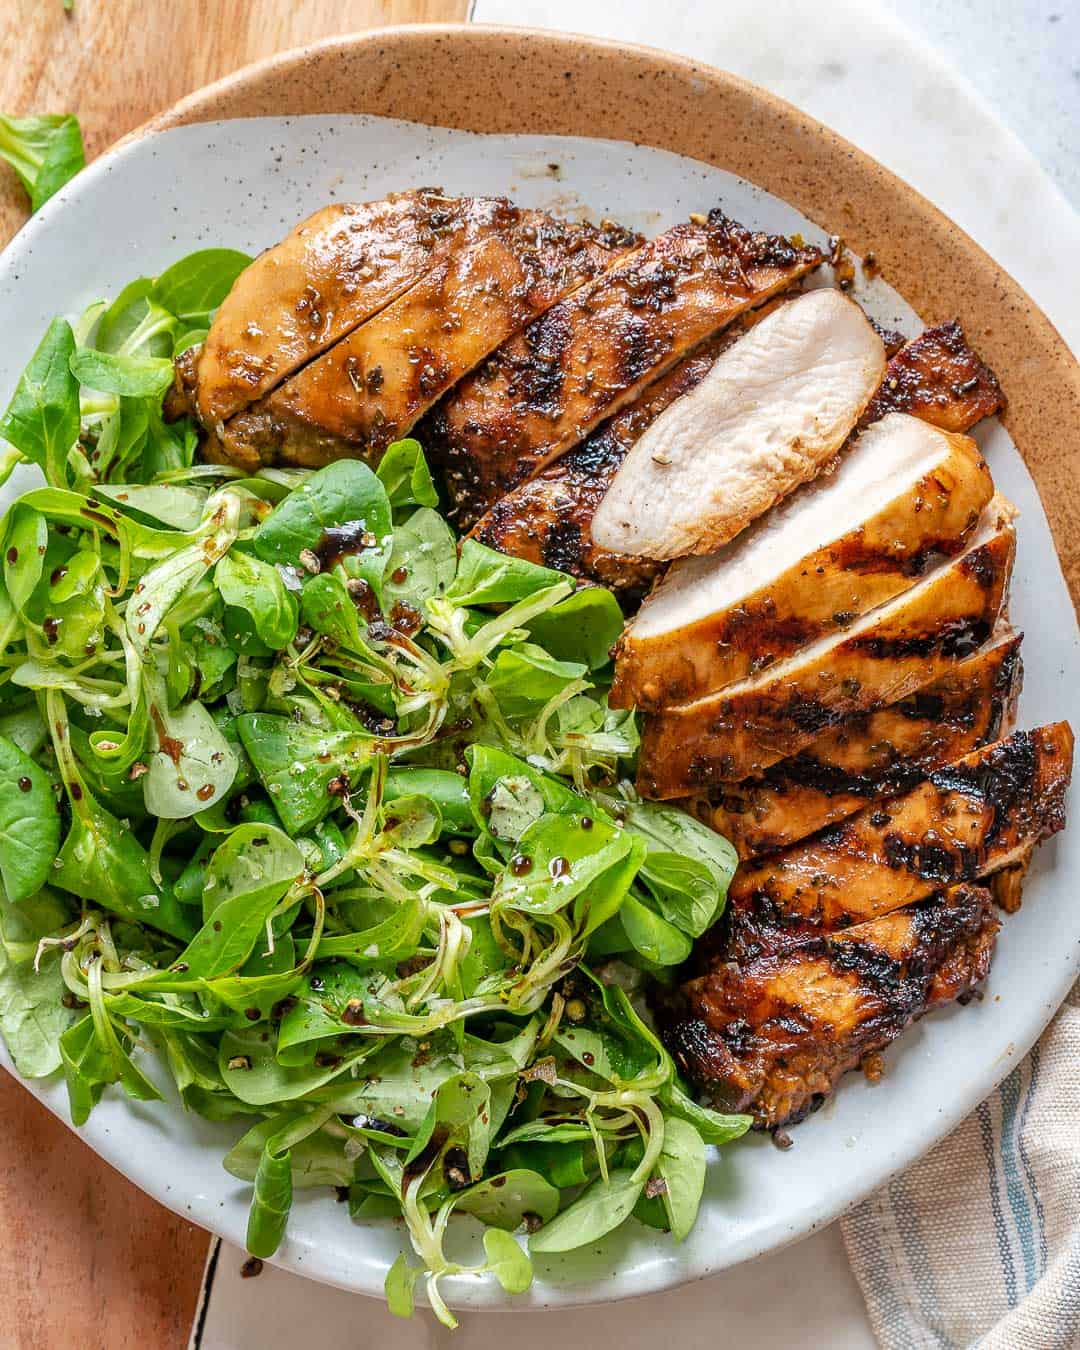 Balsamic chicken with a side of green salad on a dish